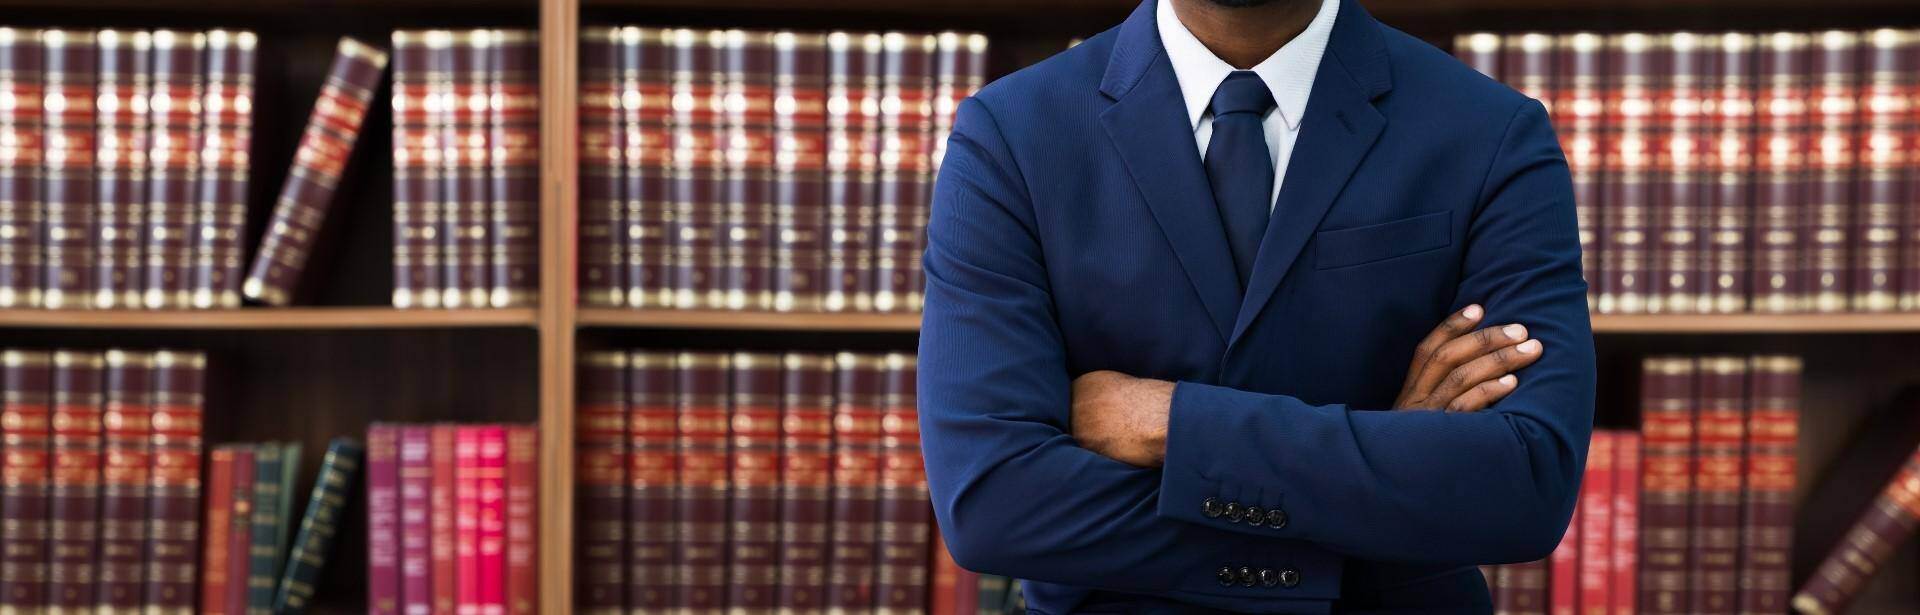 A black lawyer standing in front of a bookshelf of law book in Statesboro, Georgia